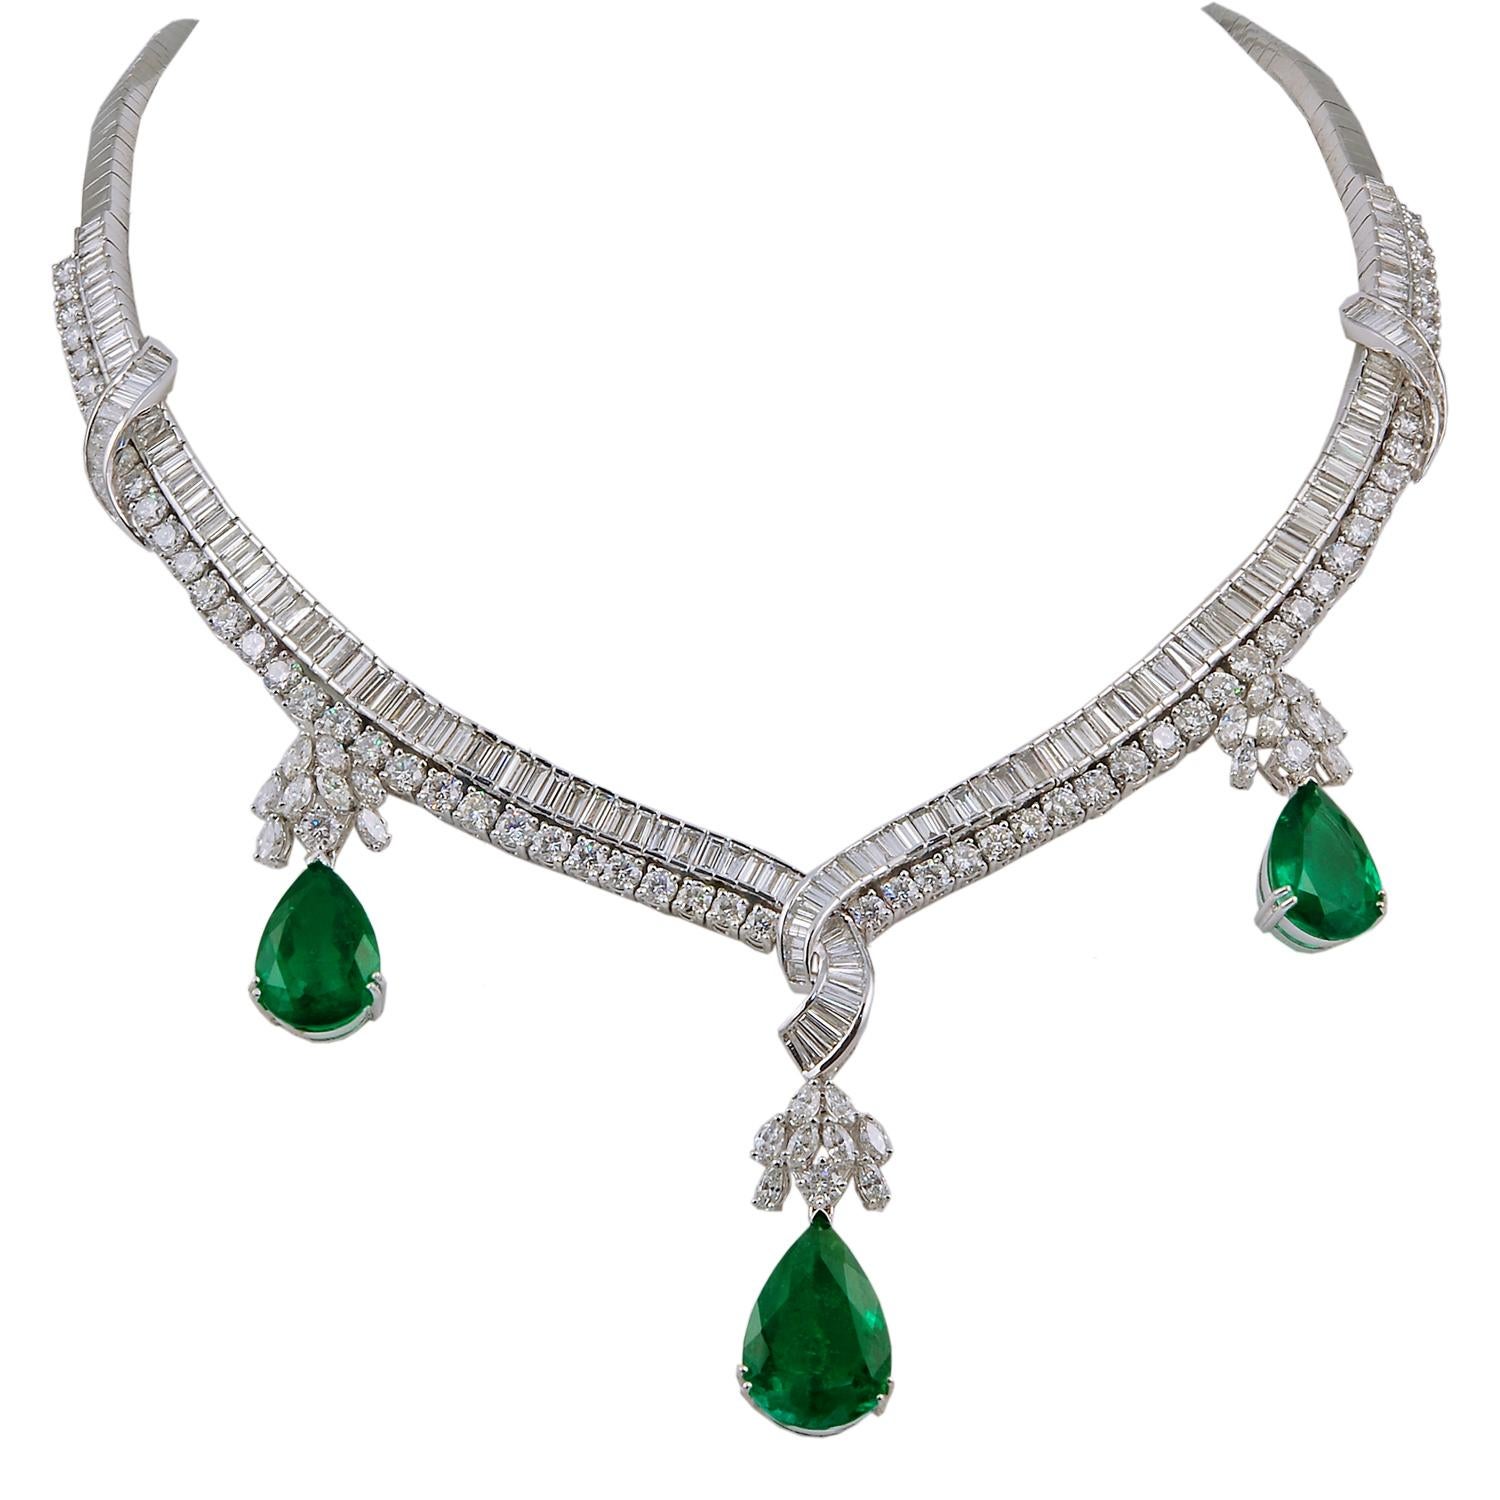 A regal suite comprising a necklace, bracelet, earrings and matching ring, all of similar design, each crafted in 18k white gold set with brilliant diamonds and pear shape emeralds. The suite is comprised with approximately 25 carats of diamonds and